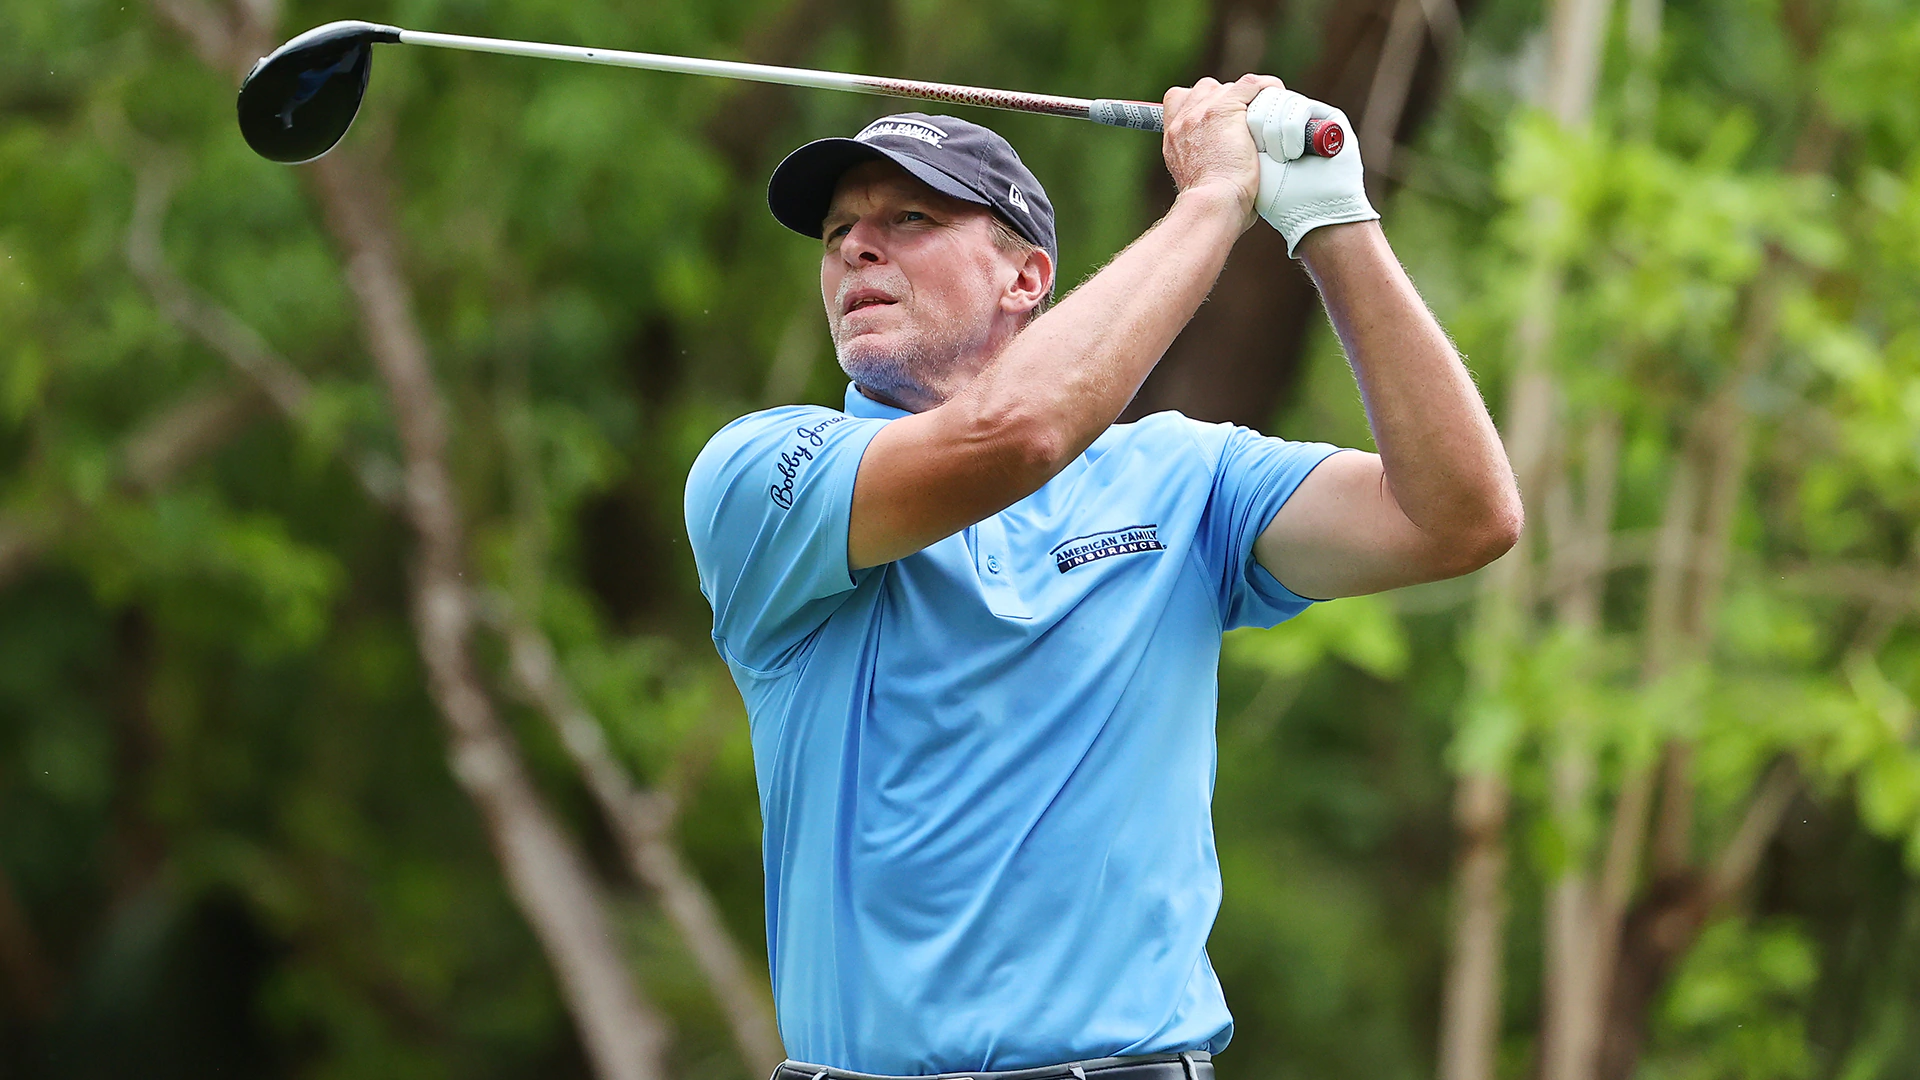 Steve Stricker flying in to take Justin Rose’s place at The Players